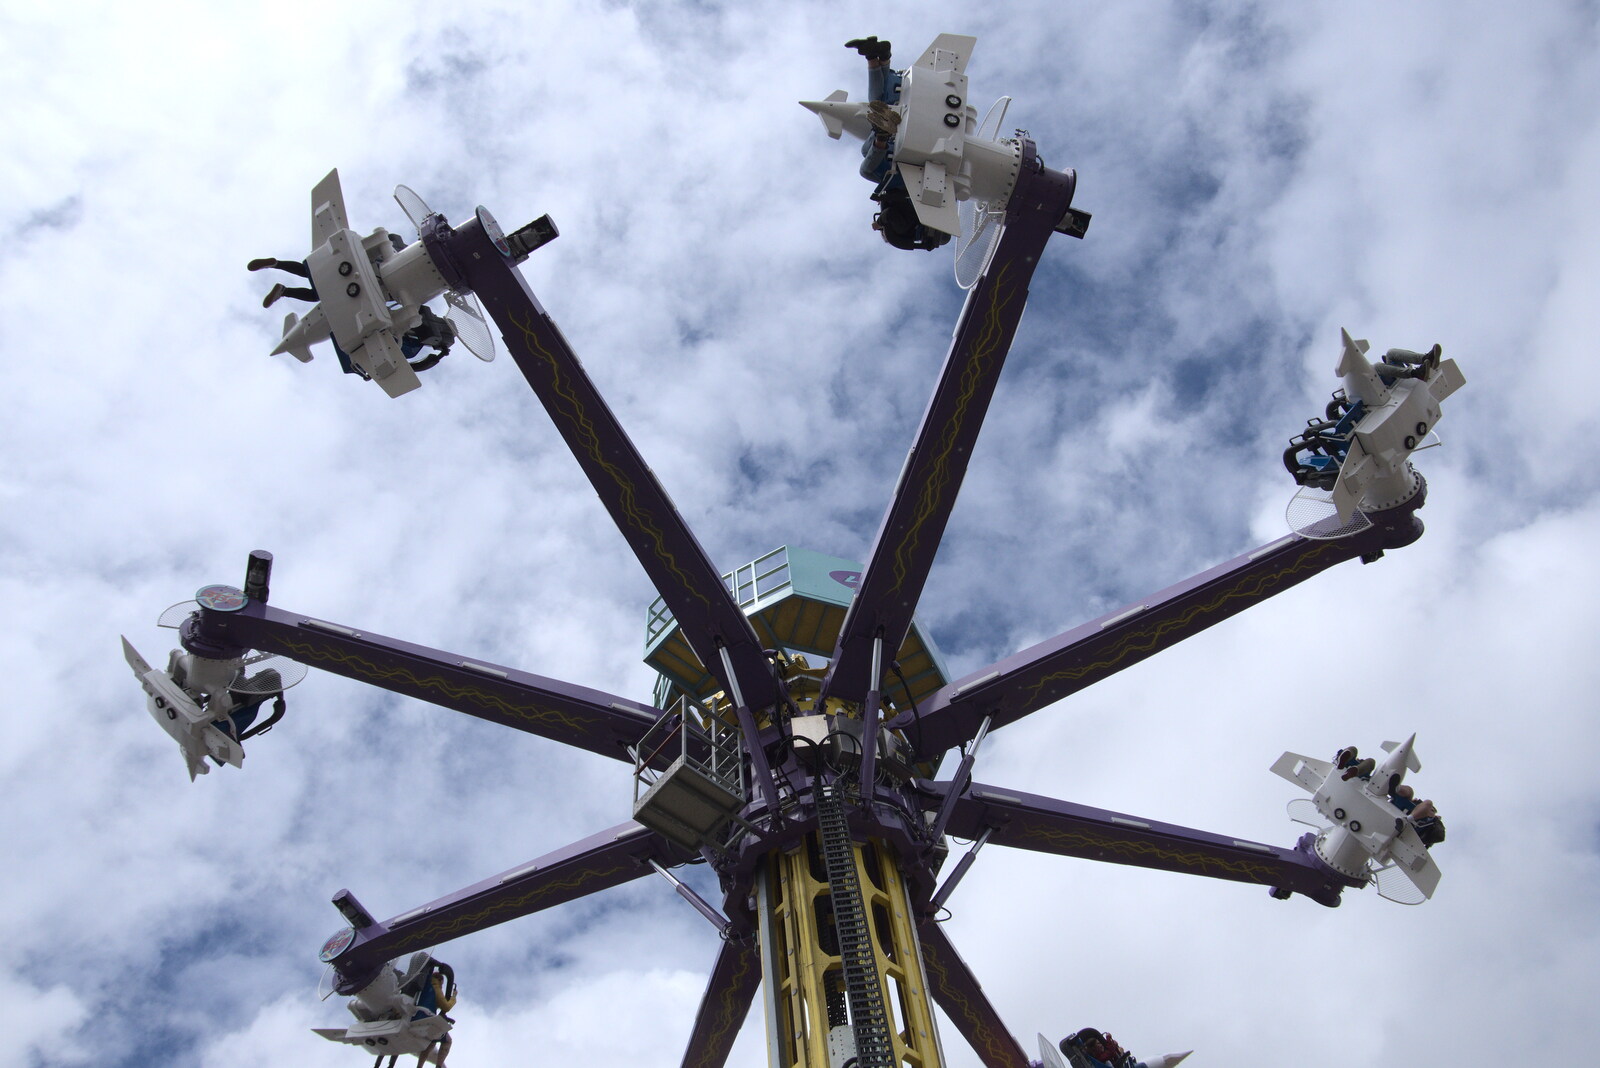 A spinning ride at the Pleasure Beach from Faded Seaside Glamour: A Weekend in Great Yarmouth, Norfolk - 29th May 2022